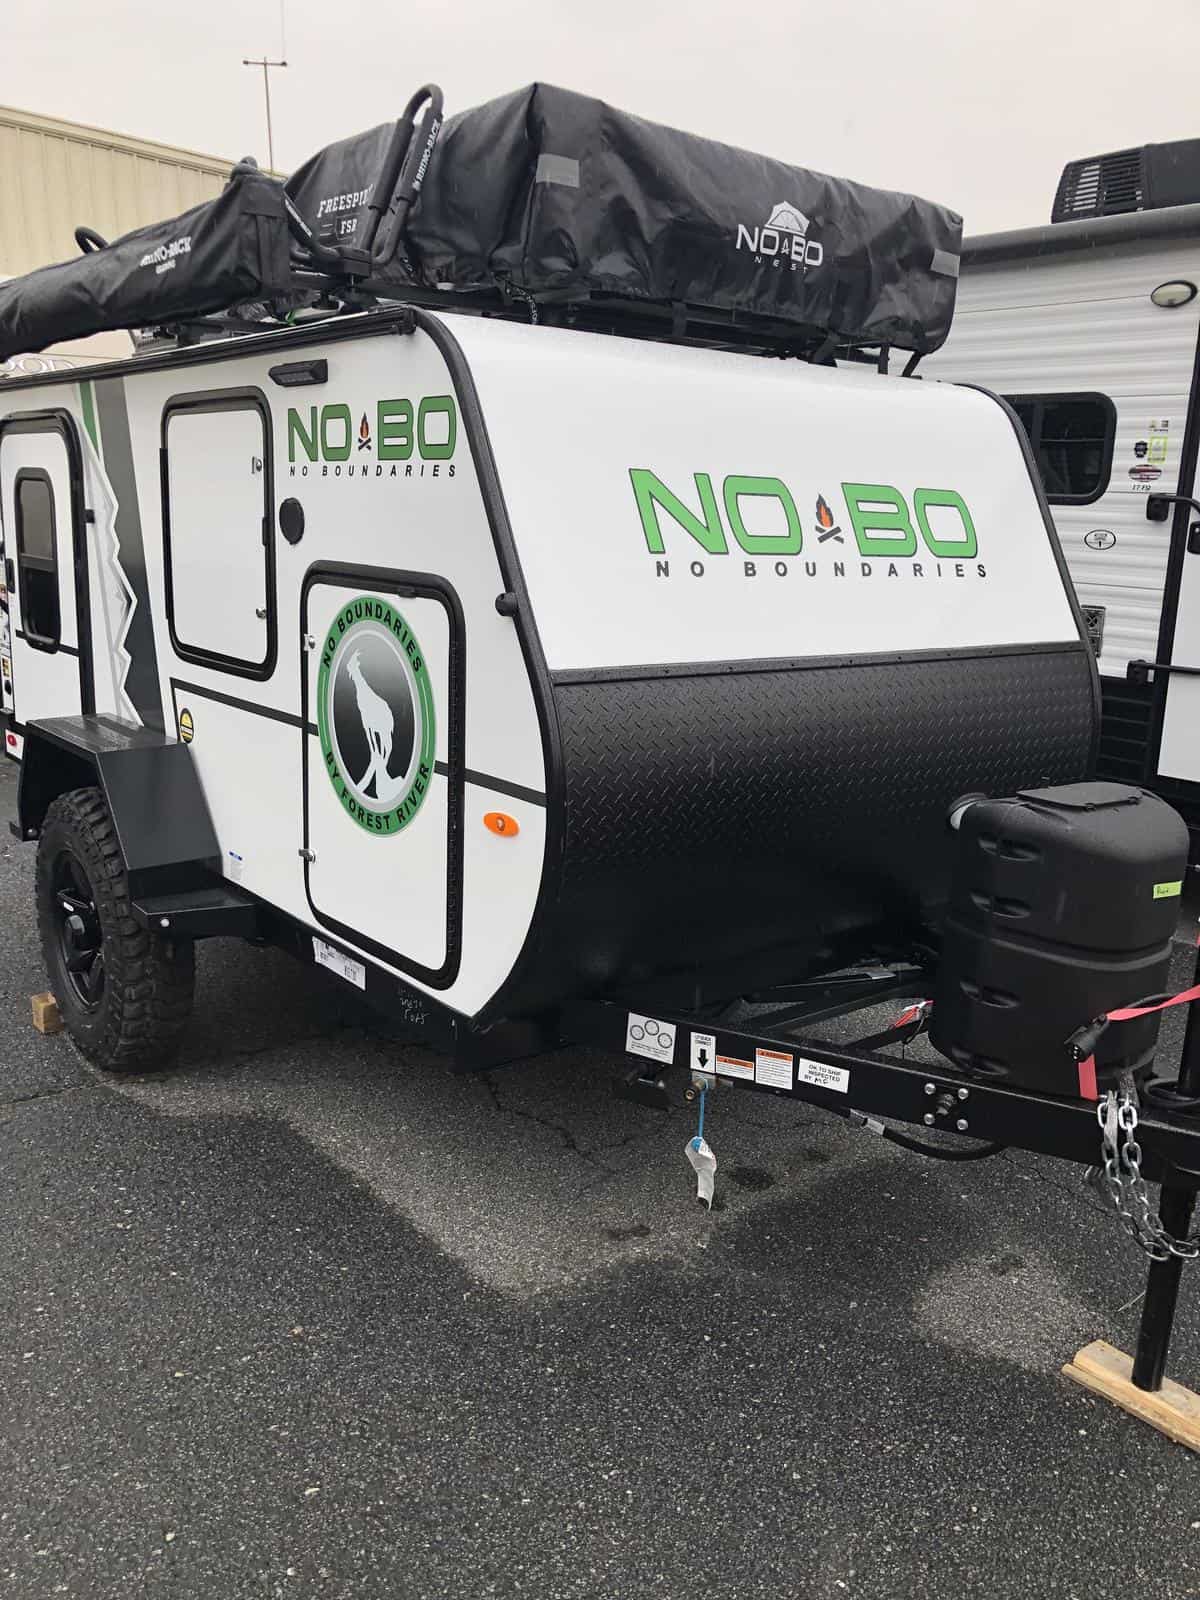 NEW 2019 Forest river No boundaries (nobo) 10.5